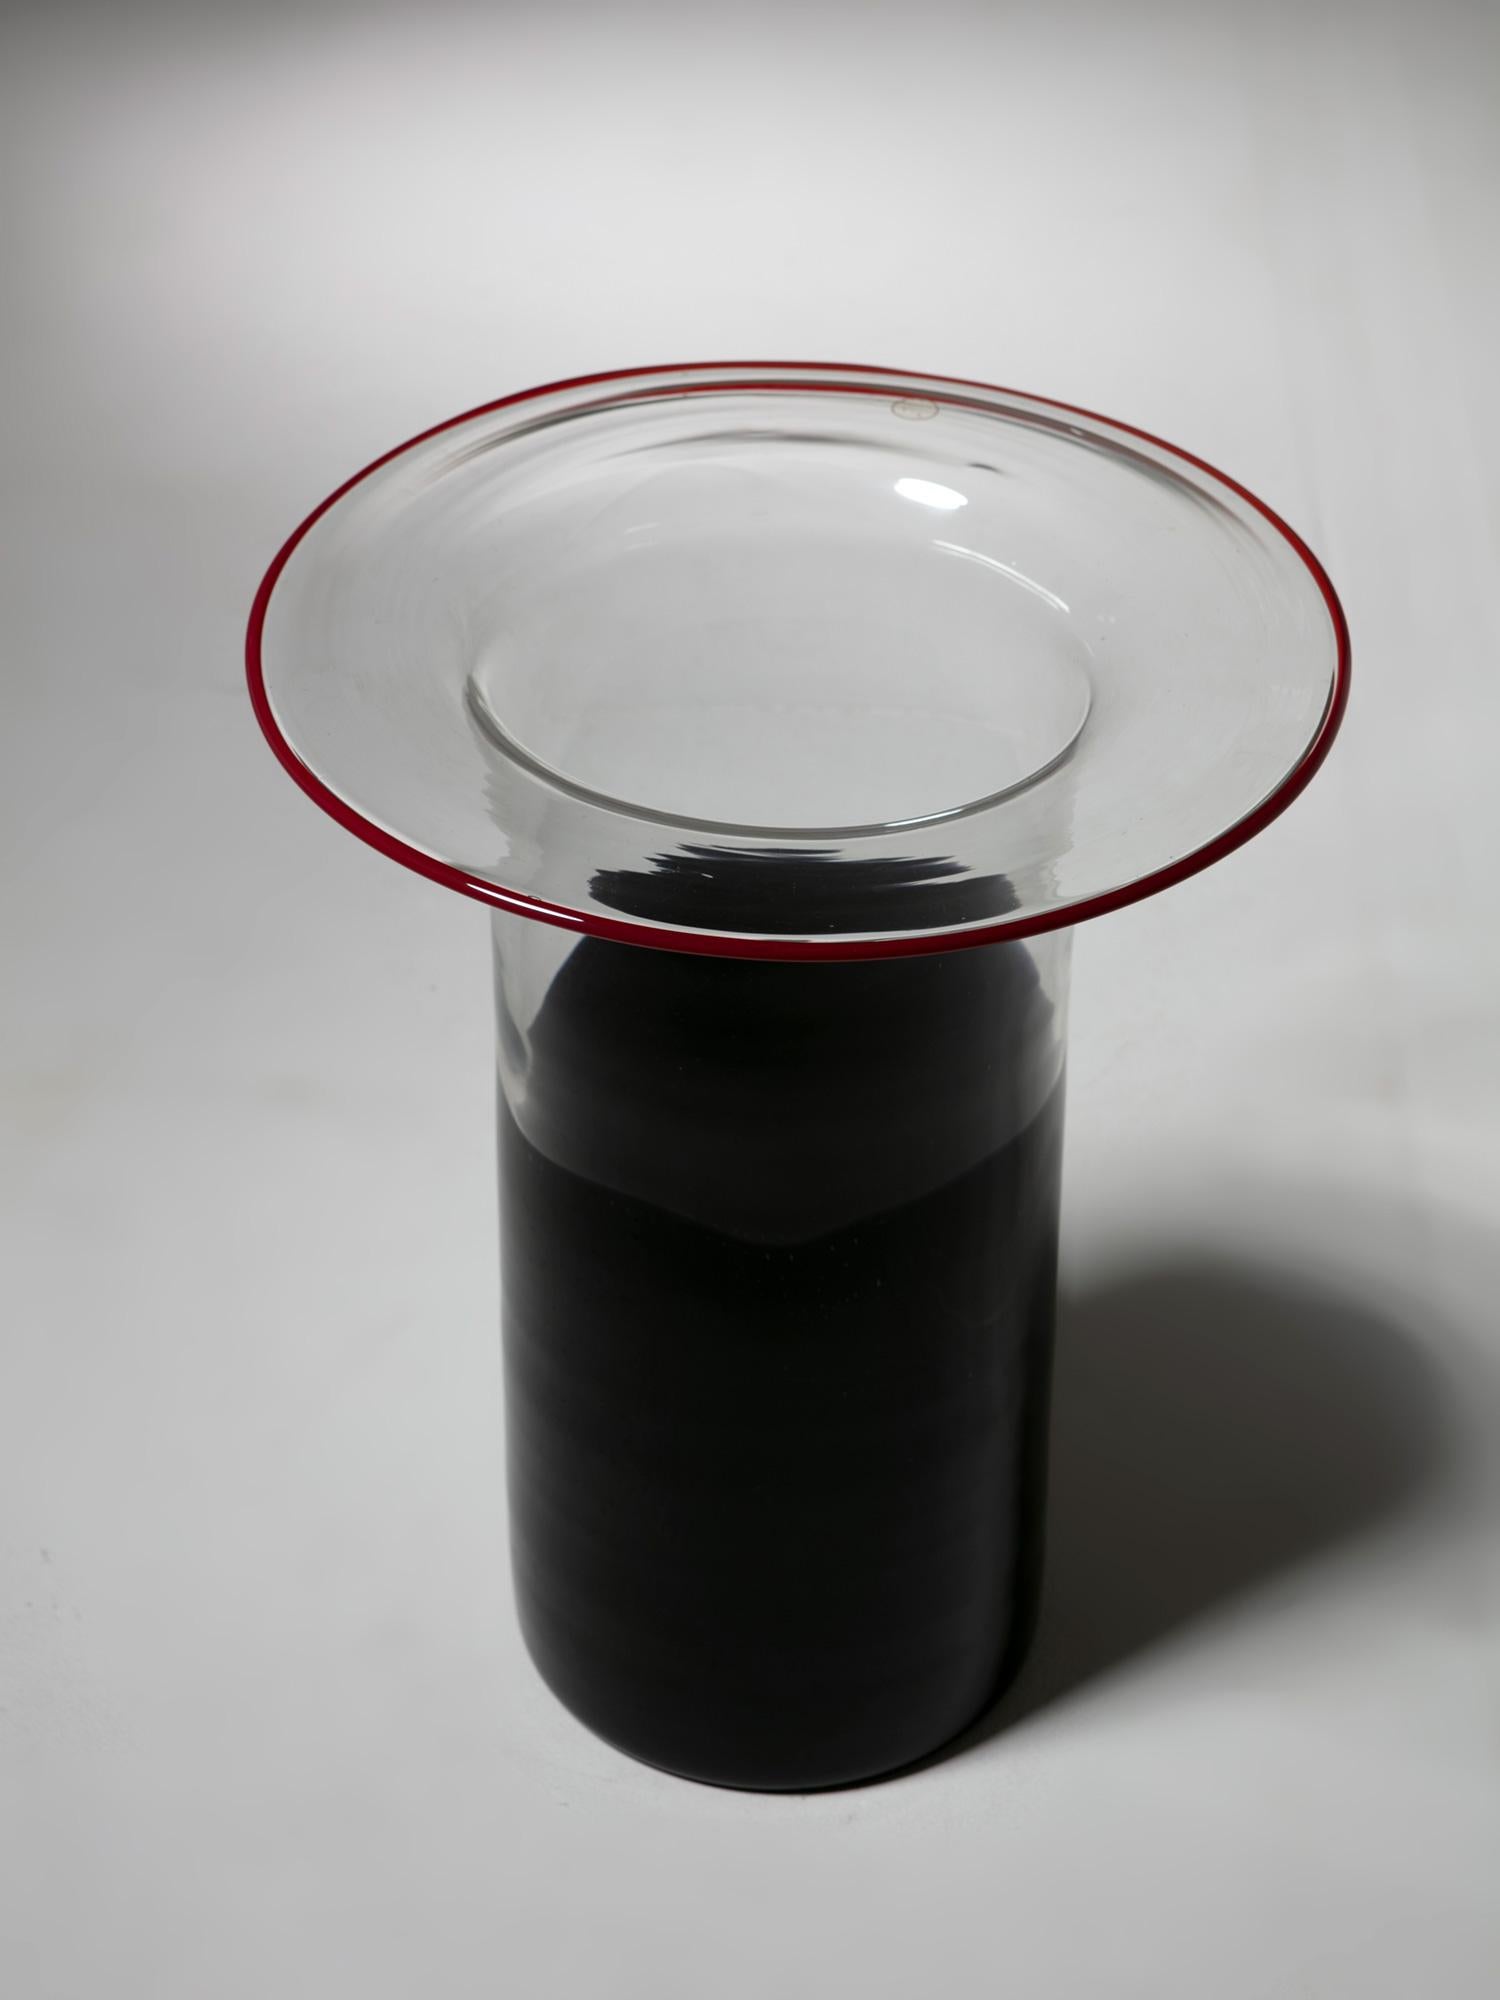 Large Chiclos Murano glass vase / umbrella stand by Renato Toso for Leucos.
Thick black and crystal doby with red rim.